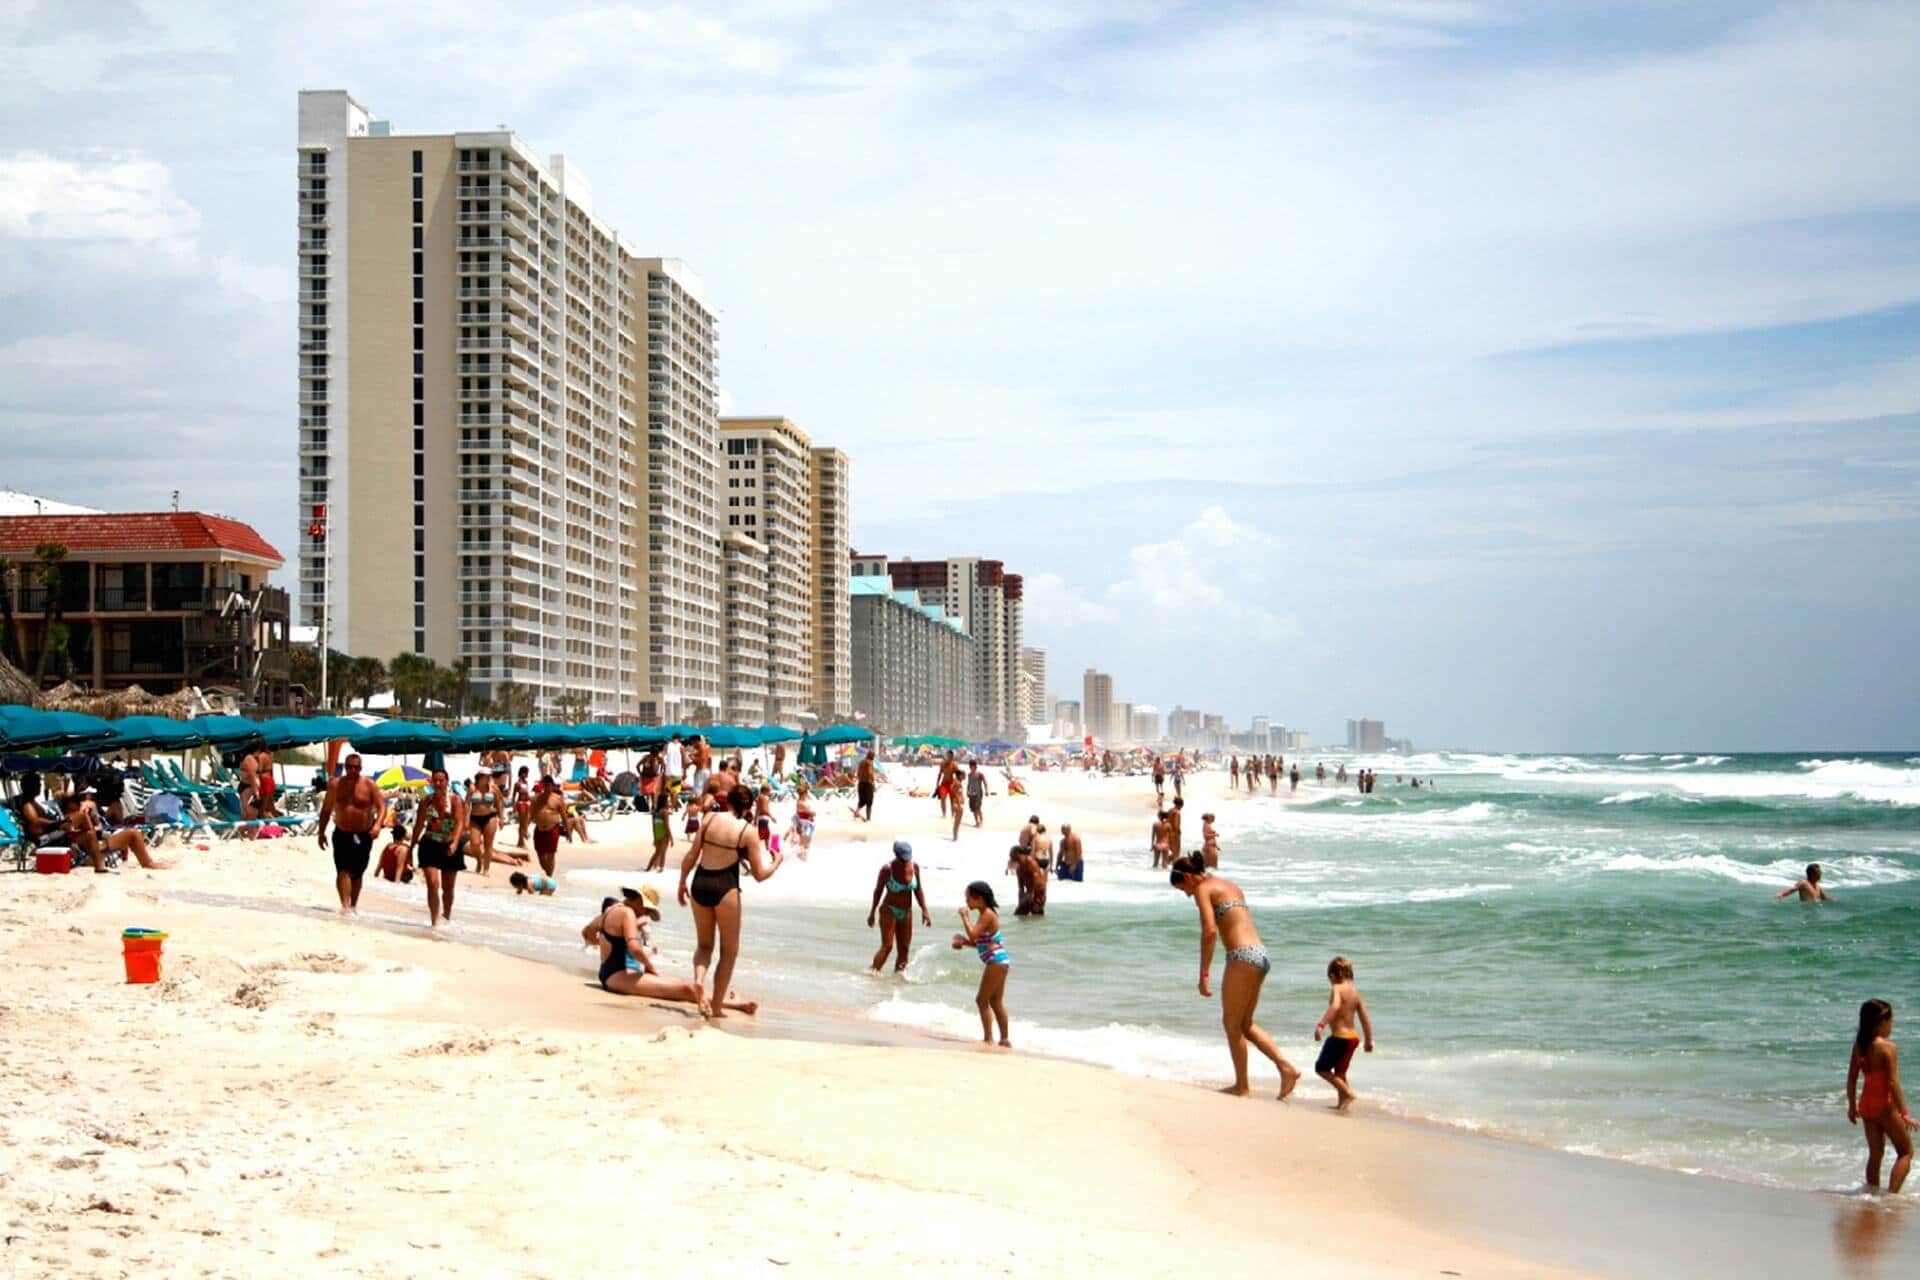 Panama City Beach  Find Hotels, Restaurants & Things to Do